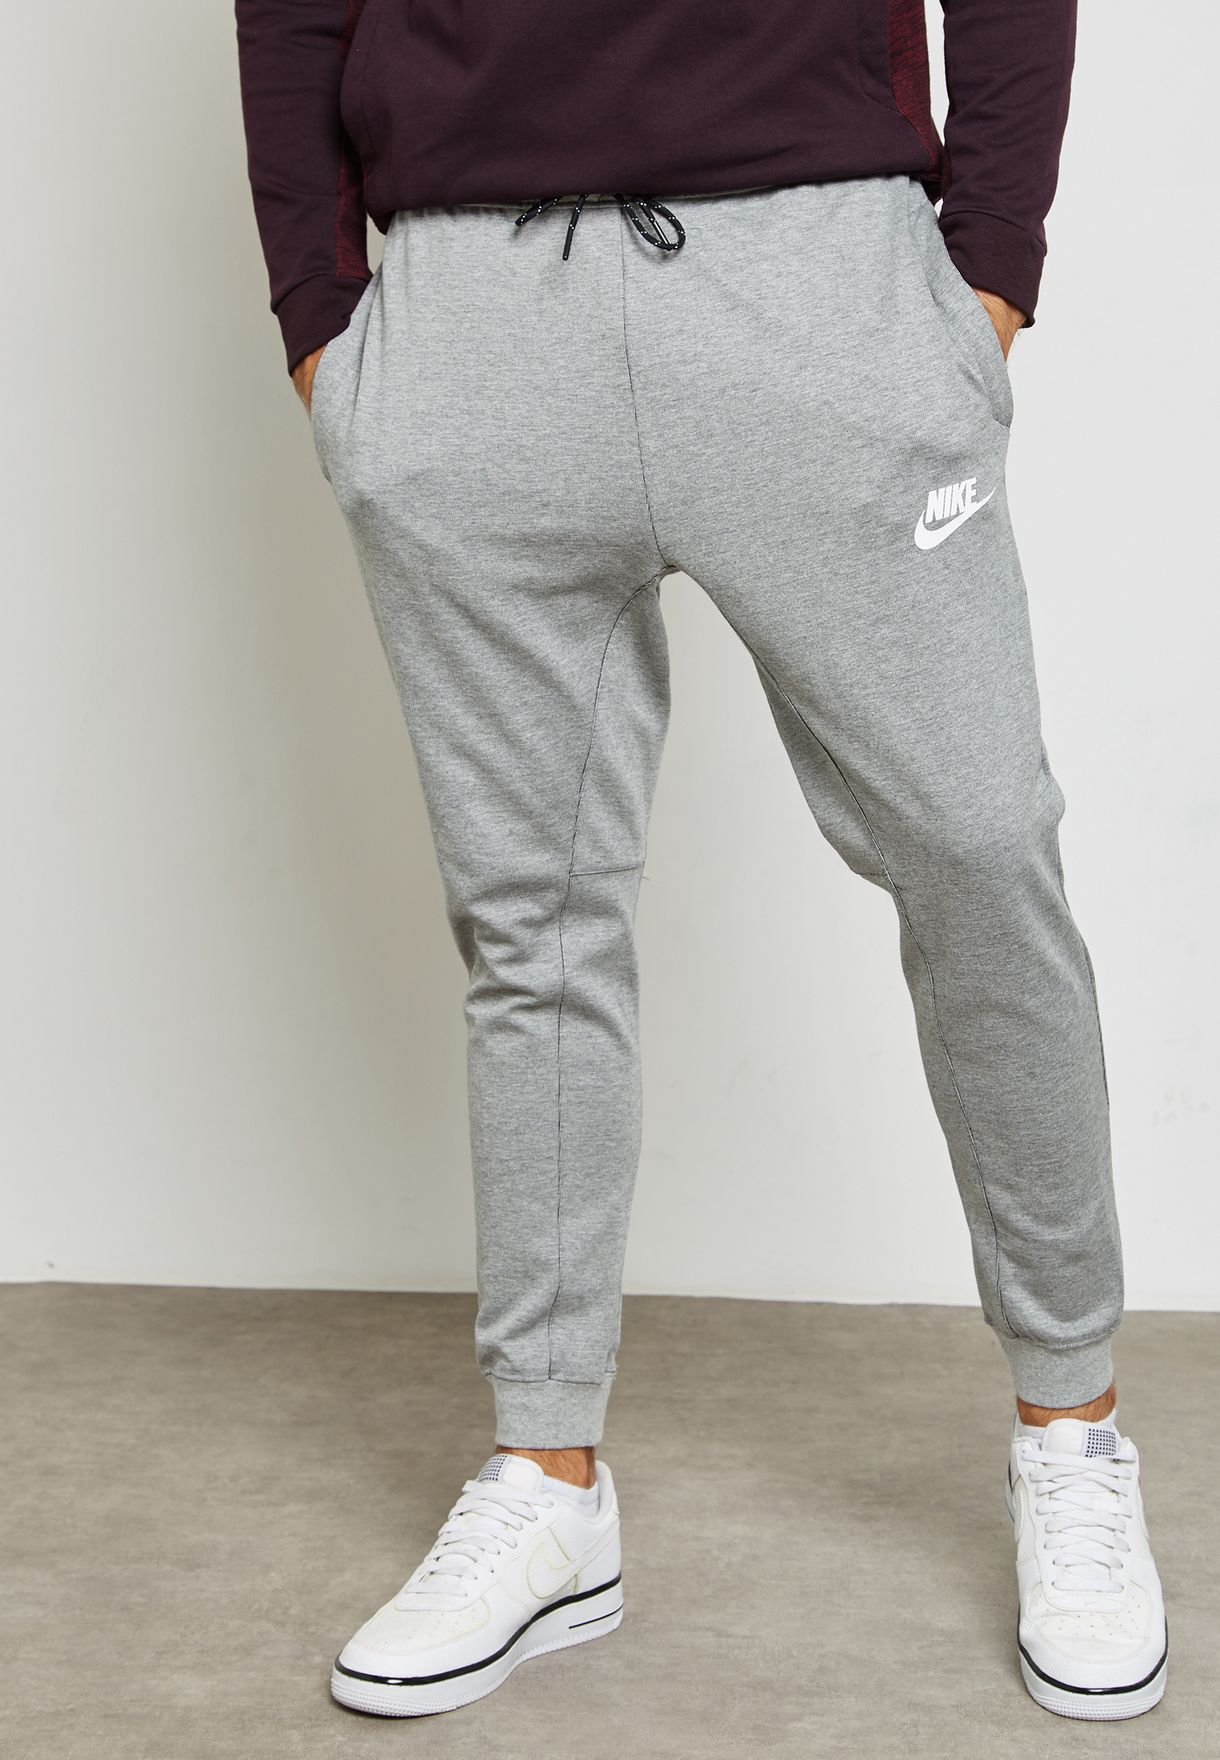 grey nike sweat outfit